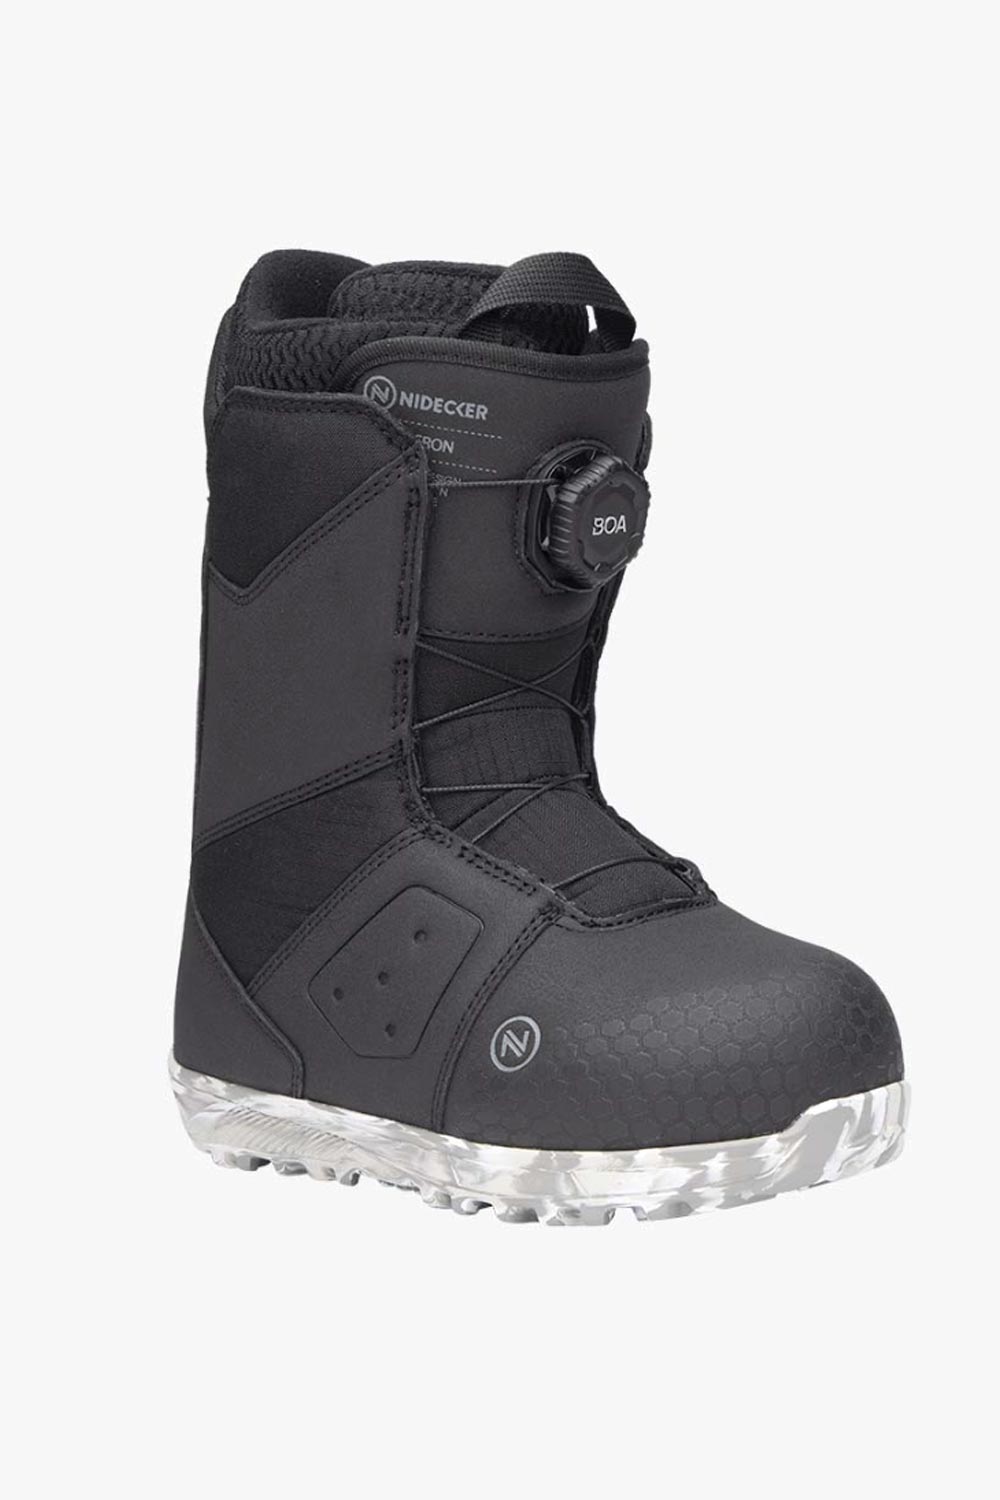 juniors' Nidecker Micron snowboard boots, black with BOA system